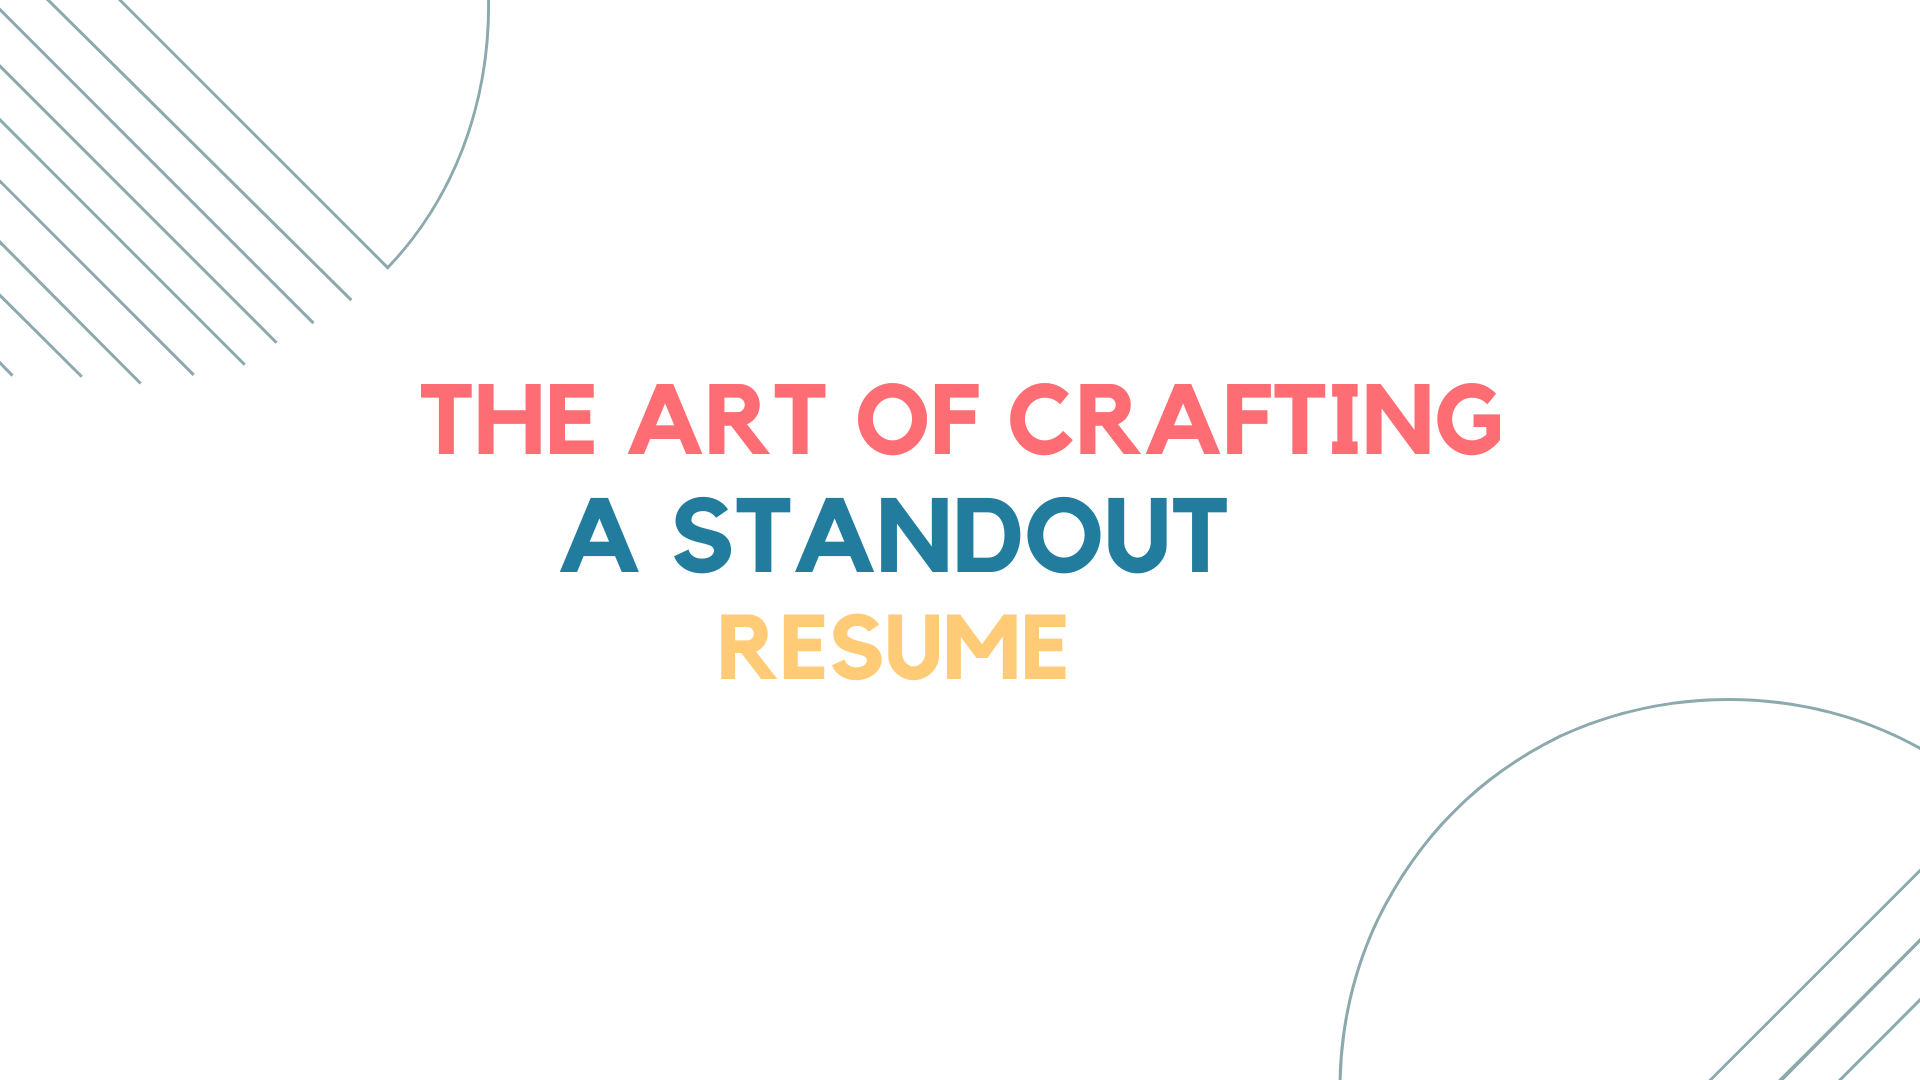 The Art of Crafting a Standout Resume